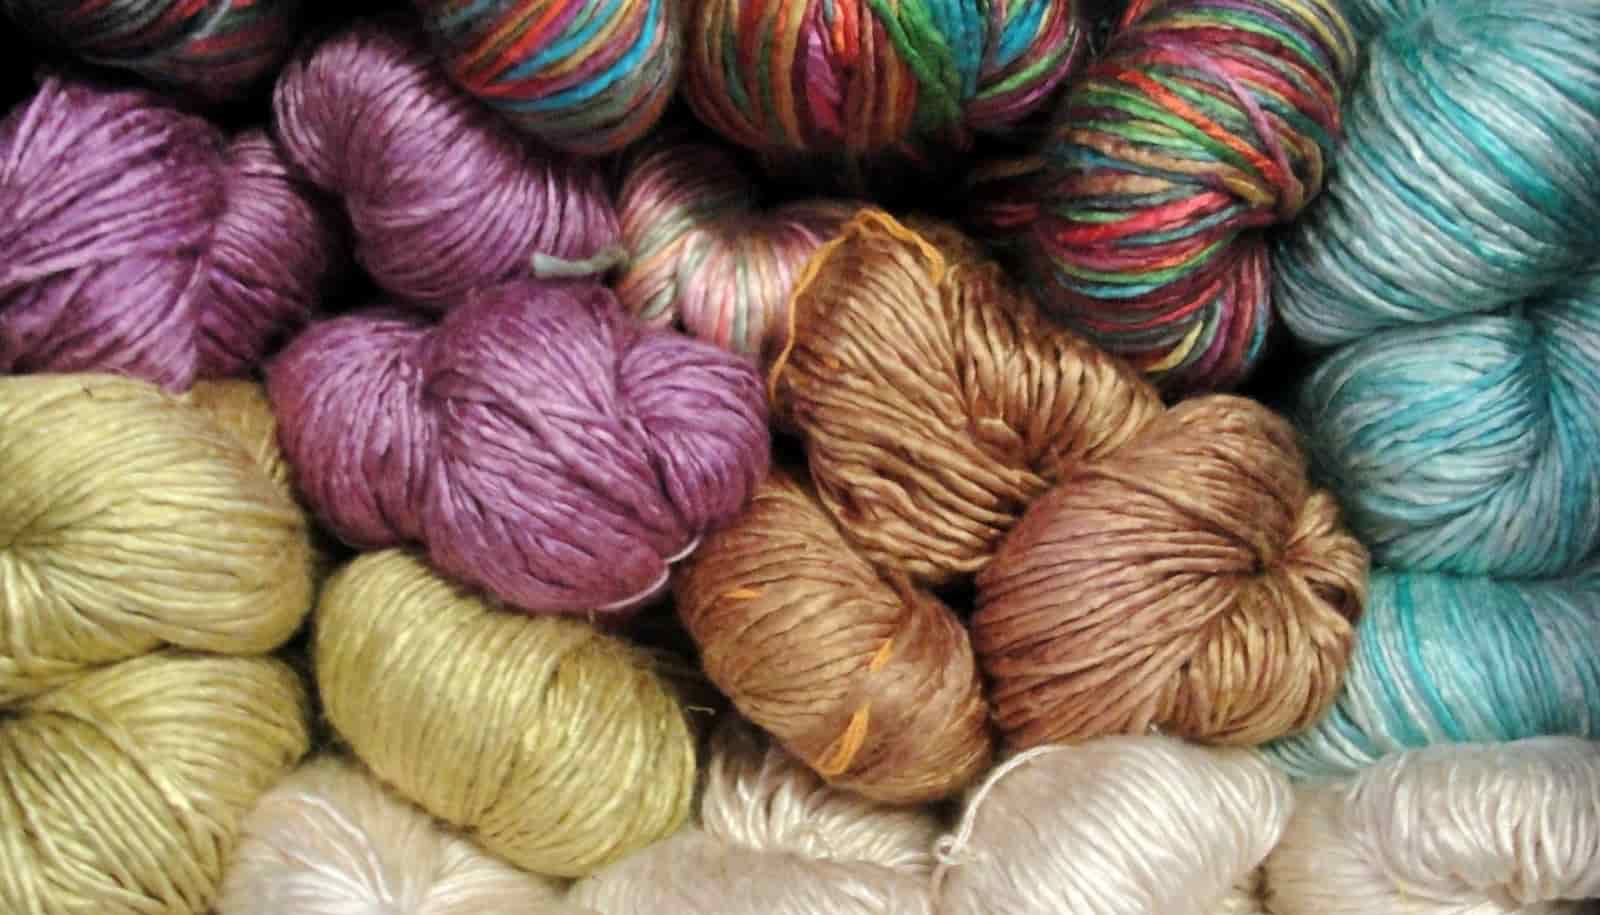  Buy Bamboo Matka Silk Yarn At an Exceptional Price 